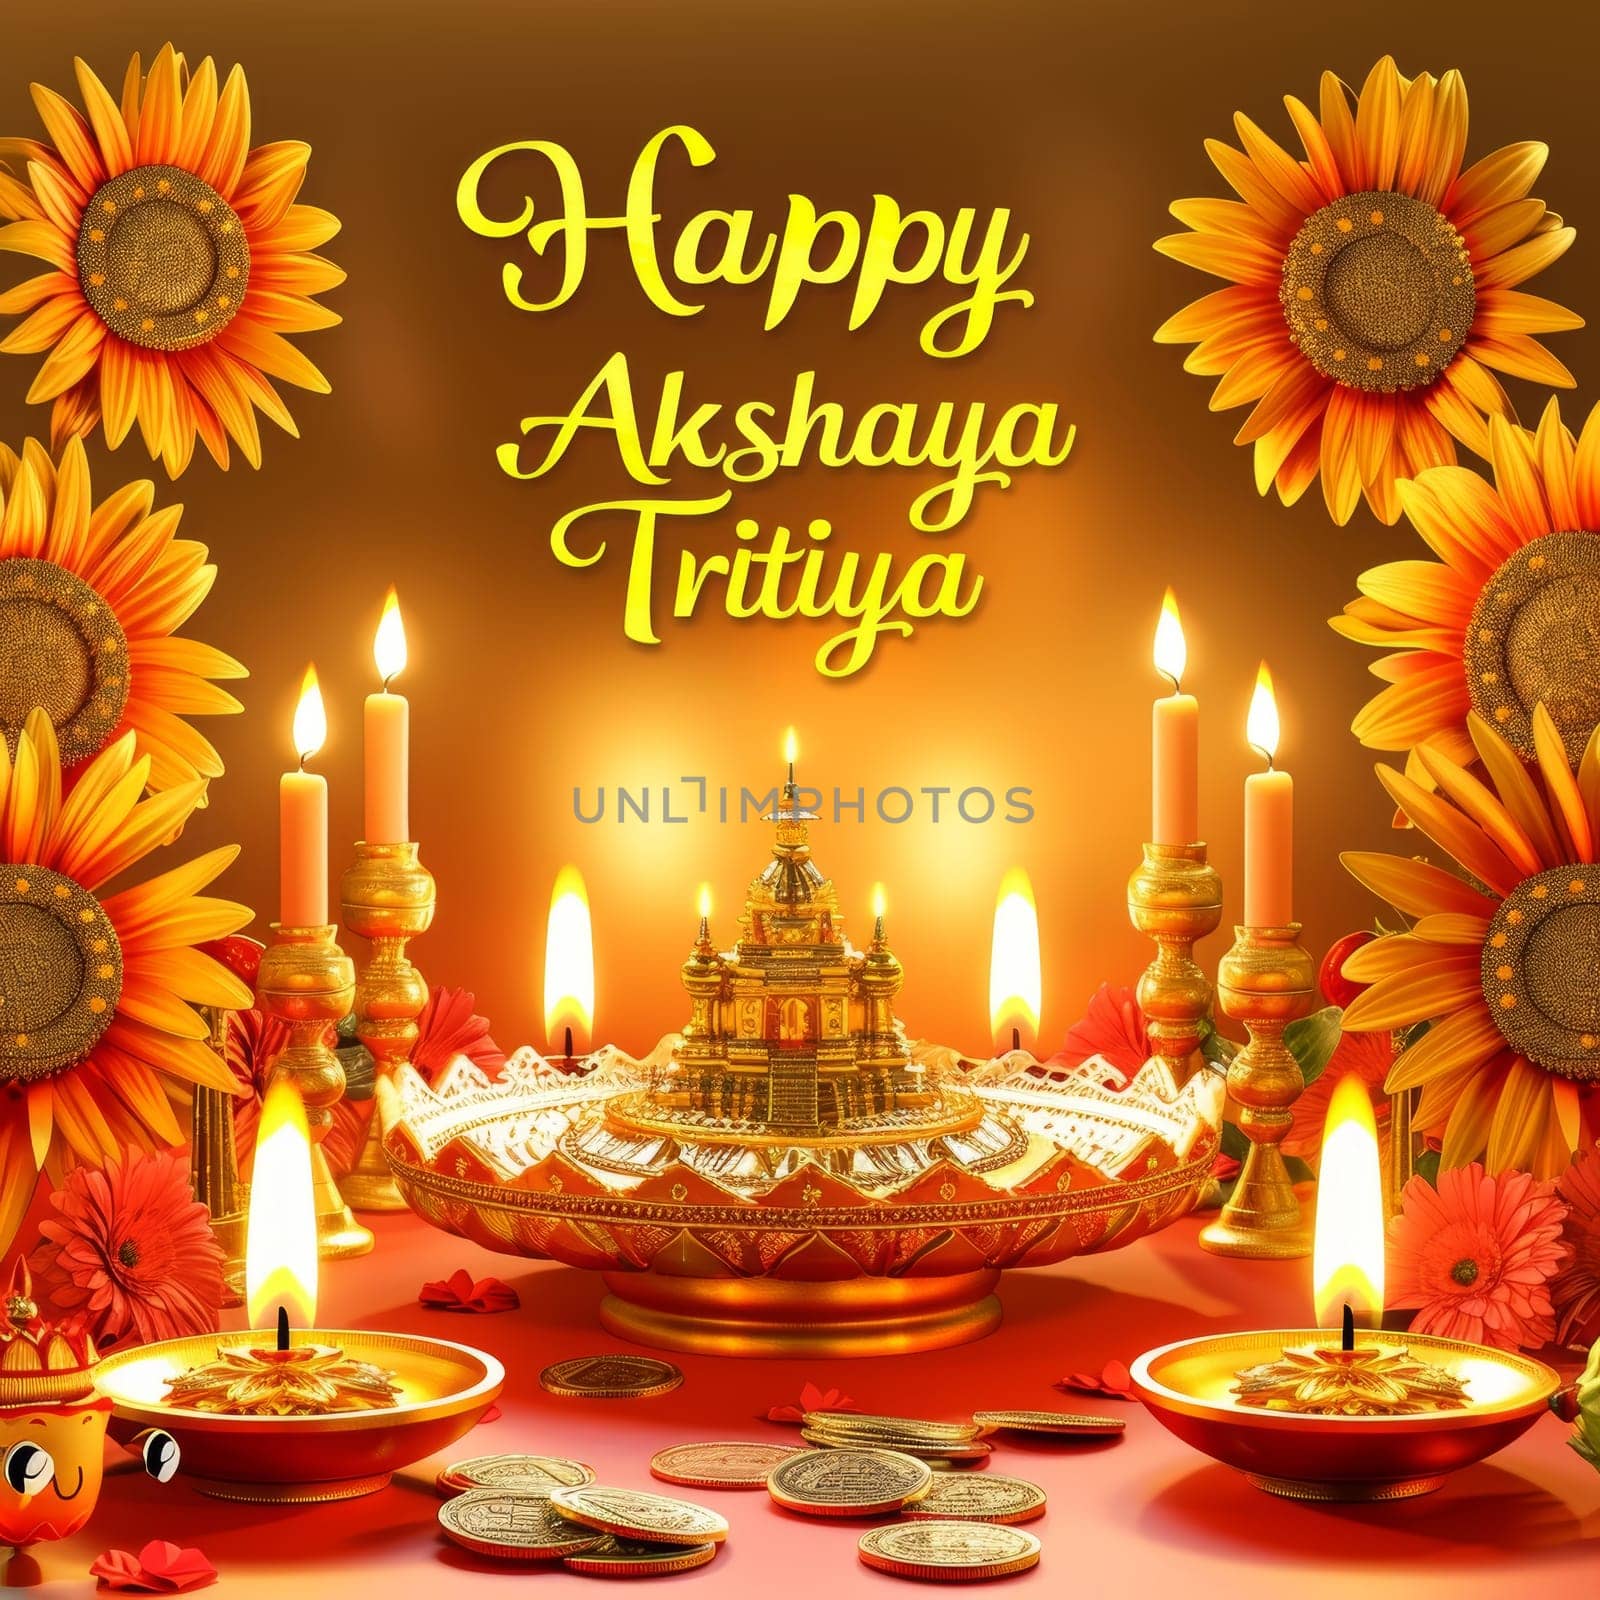 Greeting design for Akshaya Tritiya featuring candles, gold coins, and sunflowers on a gradient red background. by sfinks